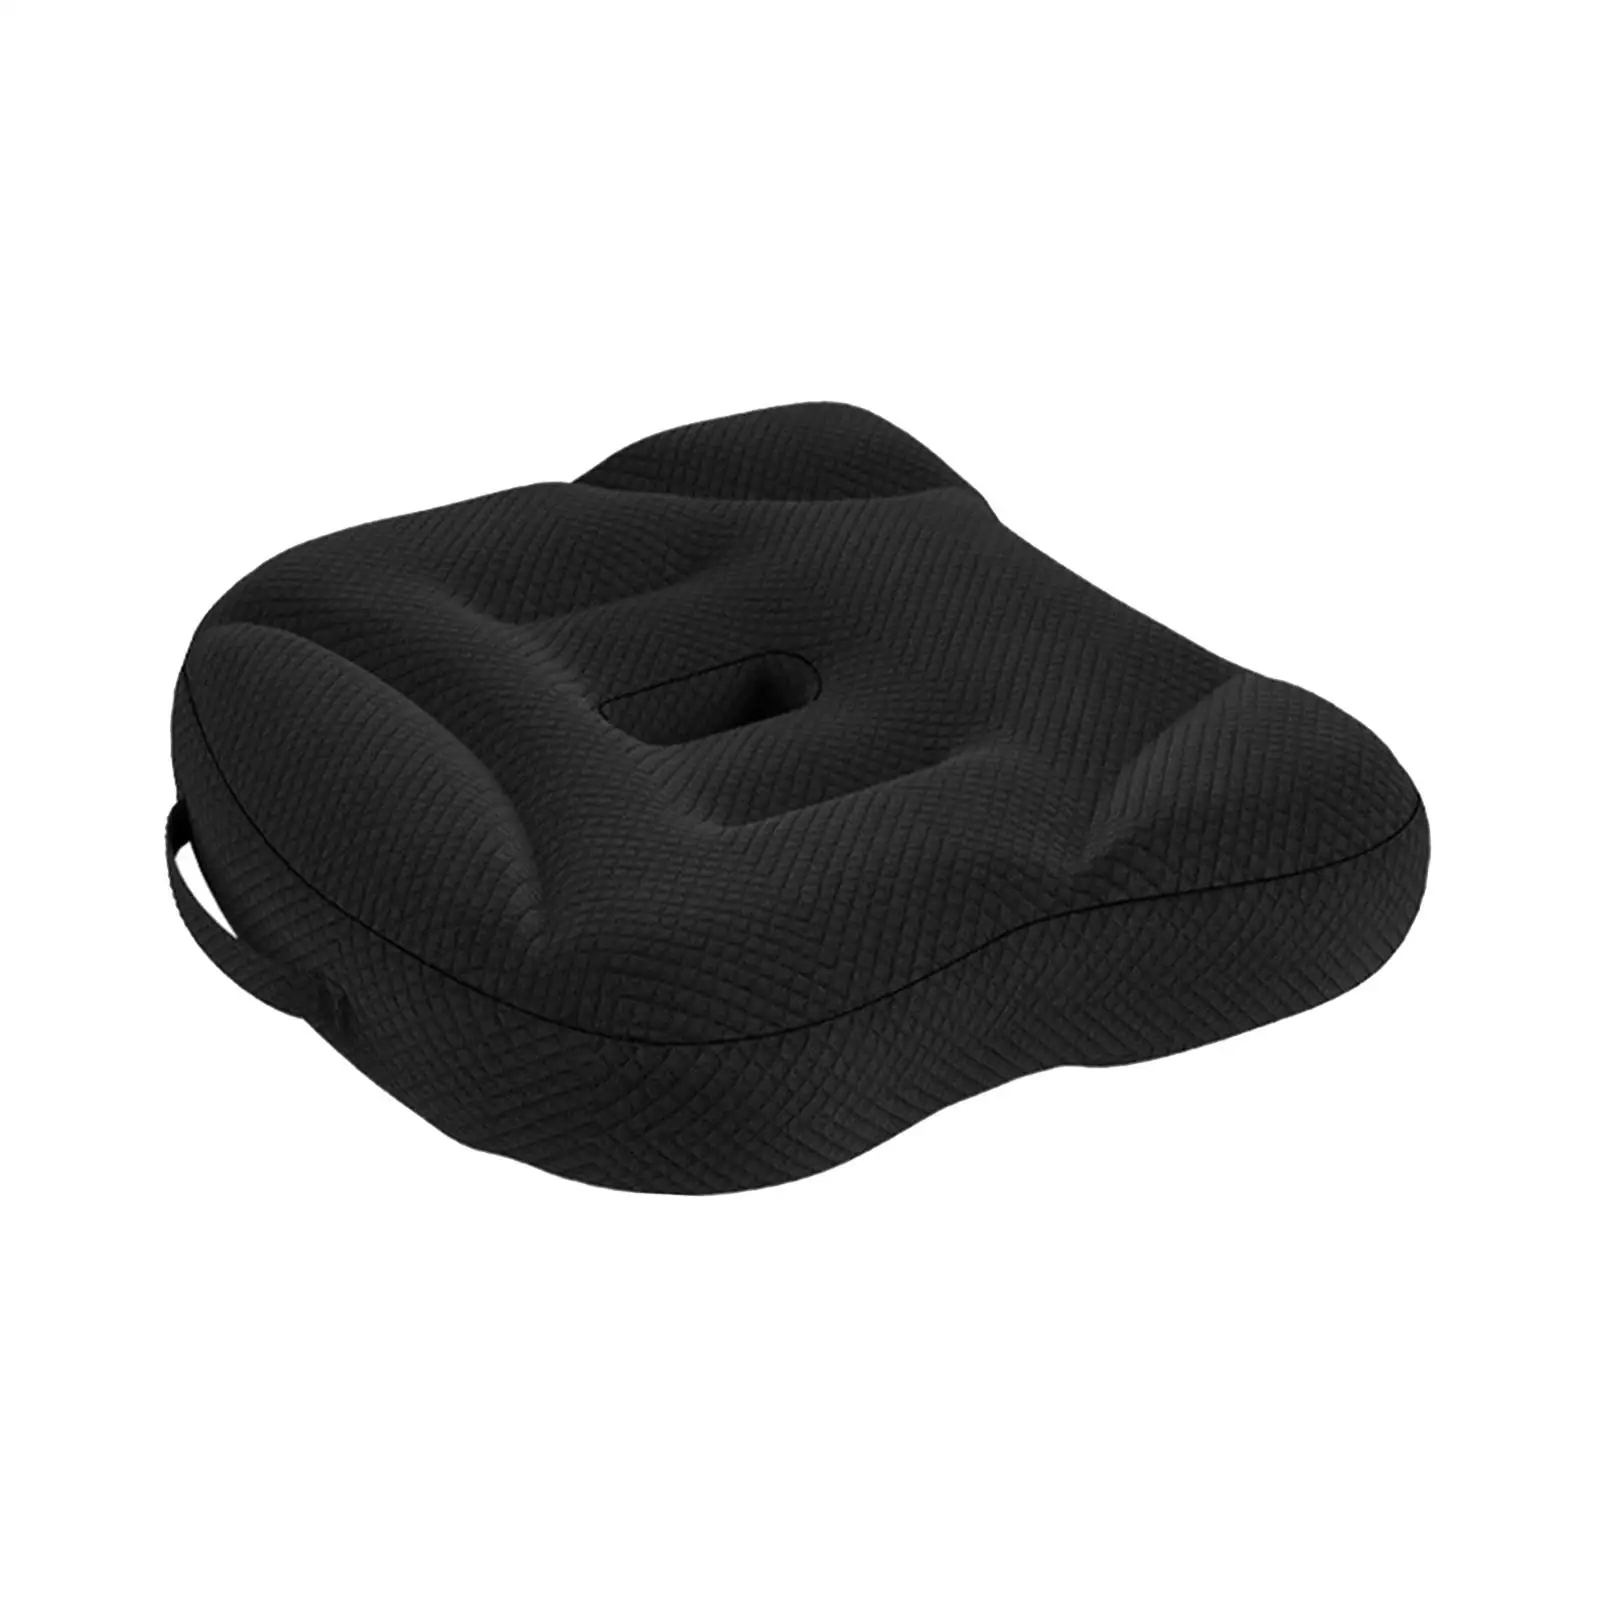 Seat Cushion Pillow Non Slip Washable Soft Chair Cushion Seat Pad Car Seat Cushions for Traveling Driving home Office